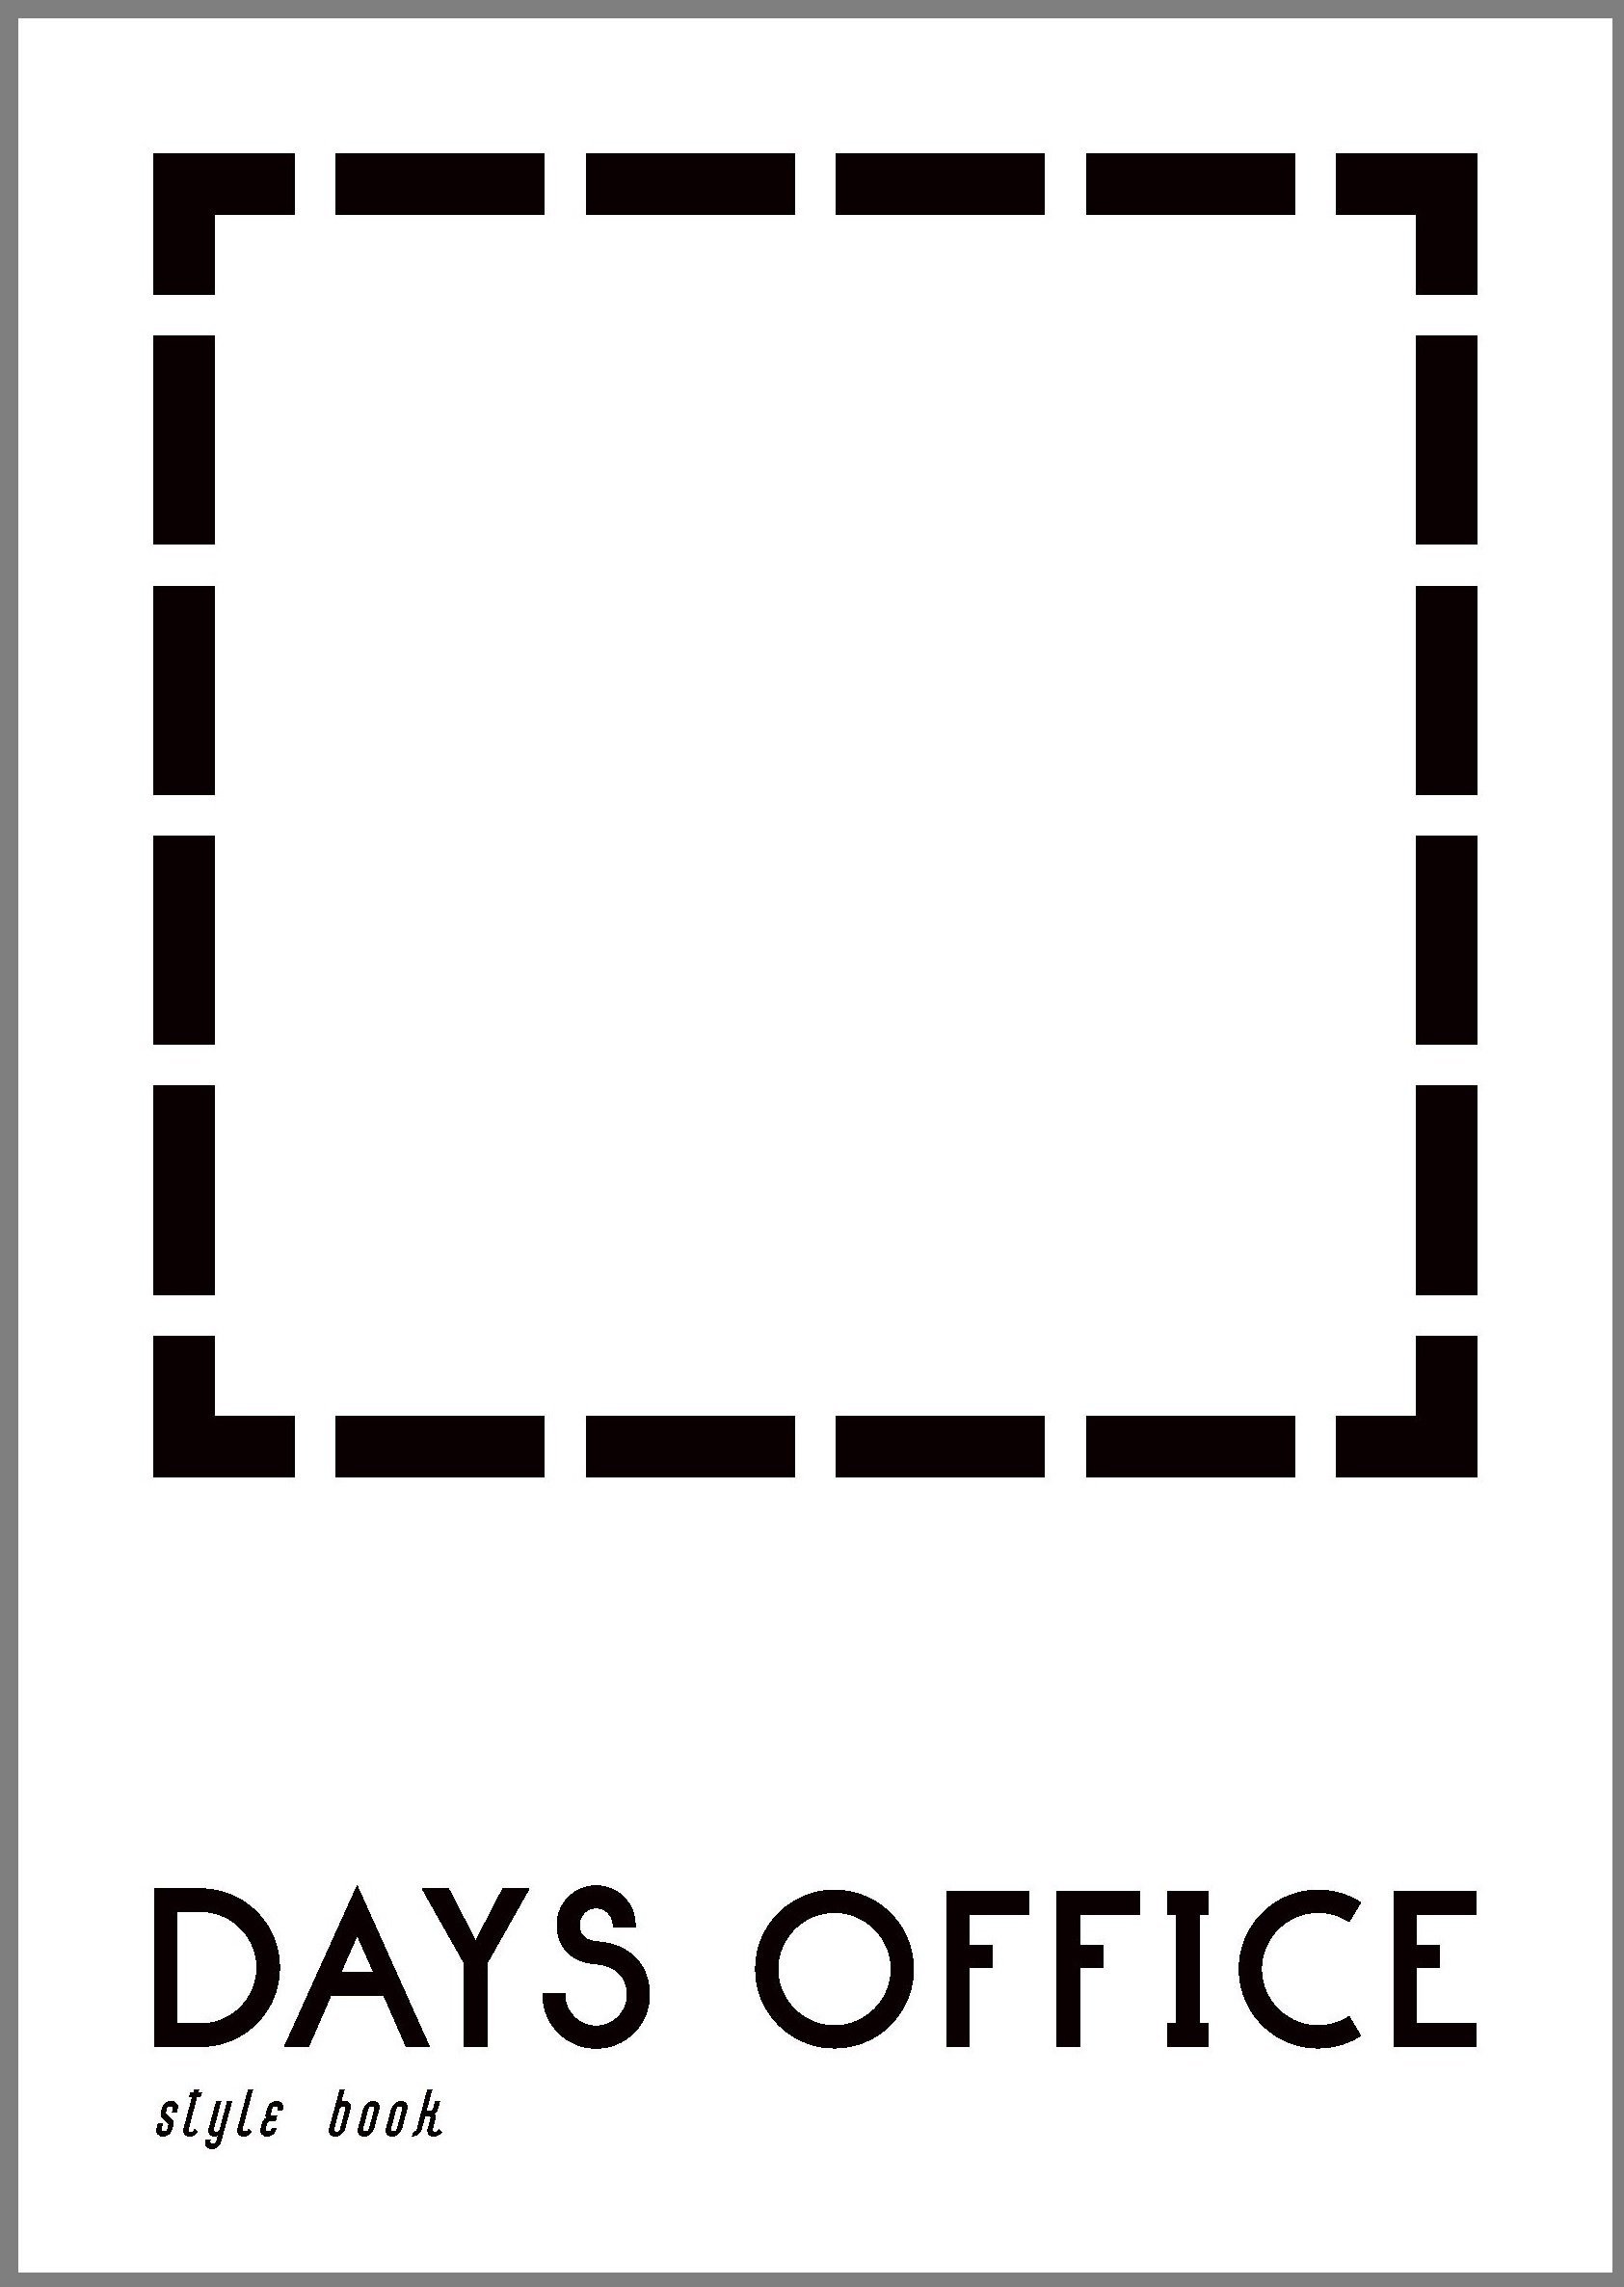 DAYS OFFICE STYLE BOOK Vol.6.3 